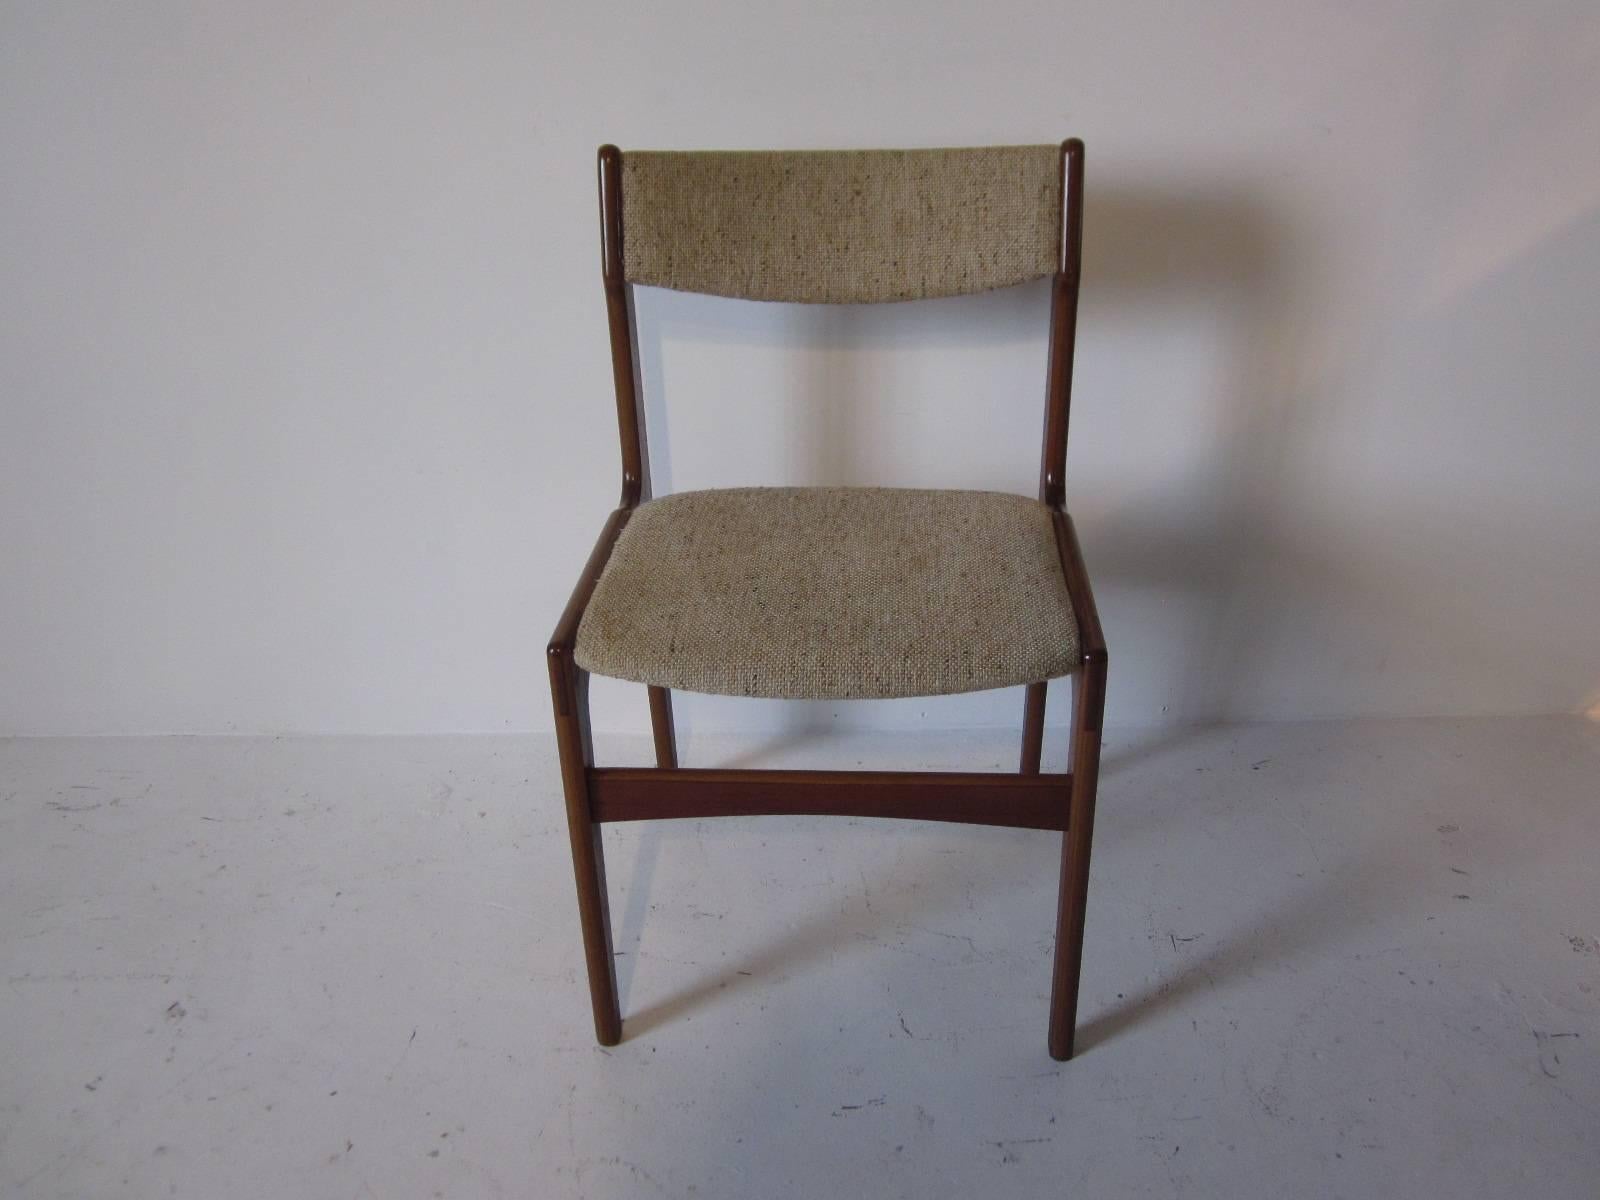 A set of four teak framed dining chairs with wool blend oat meal toned upholstery, made in Denmark.